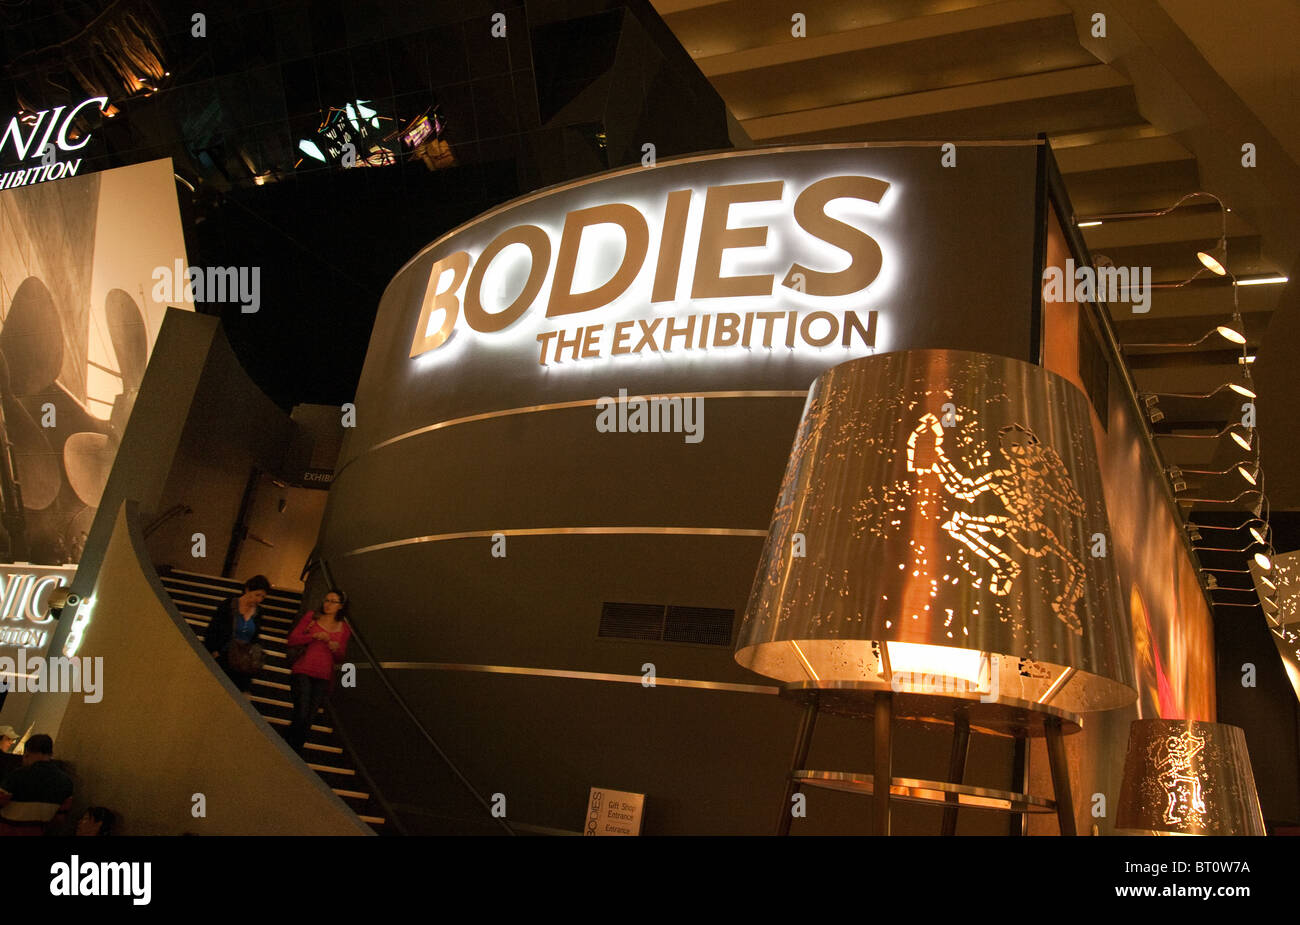 The entrance to the 'Bodies' exhibition with dissected human bodies on display, the Luxor Hotel, Las Vegas USA Stock Photo